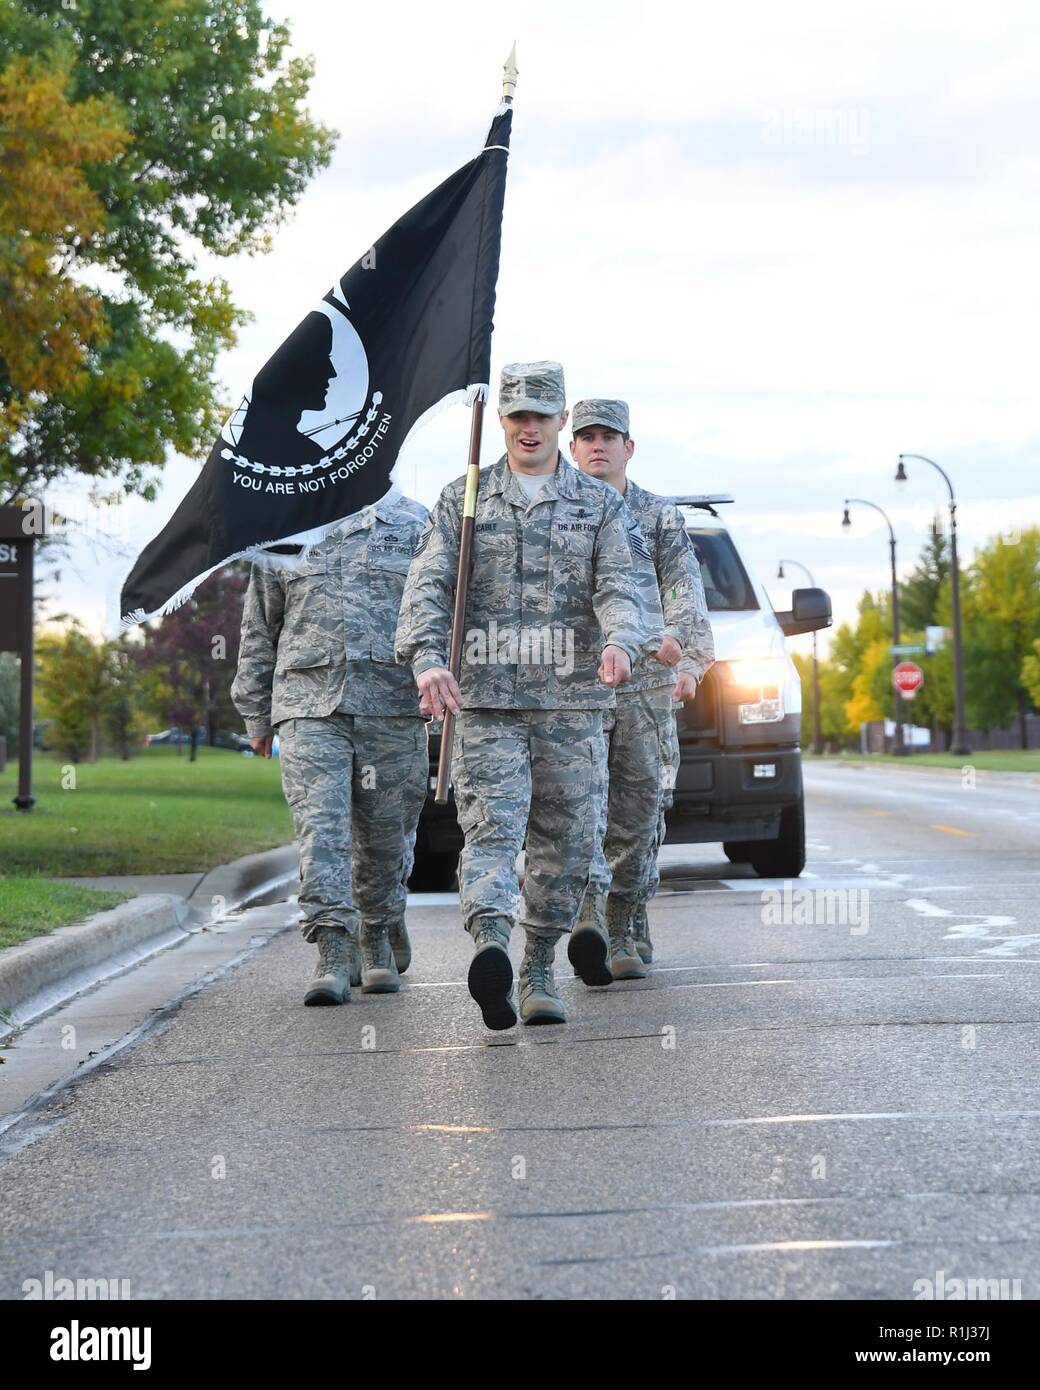 Master Sgt. Daniel Cable, 319th Operations Support Squadron fire sergeant, center, calls cadence as he leads an element to the base honor guard building for a POW/MIA ceremony September 21, 2018, on Grand Forks Air Force Base, North Dakota. Prior to the ceremony, the POW/MIA flag was kept in motion by base Airmen who carried it during a 24-hour run. Stock Photo